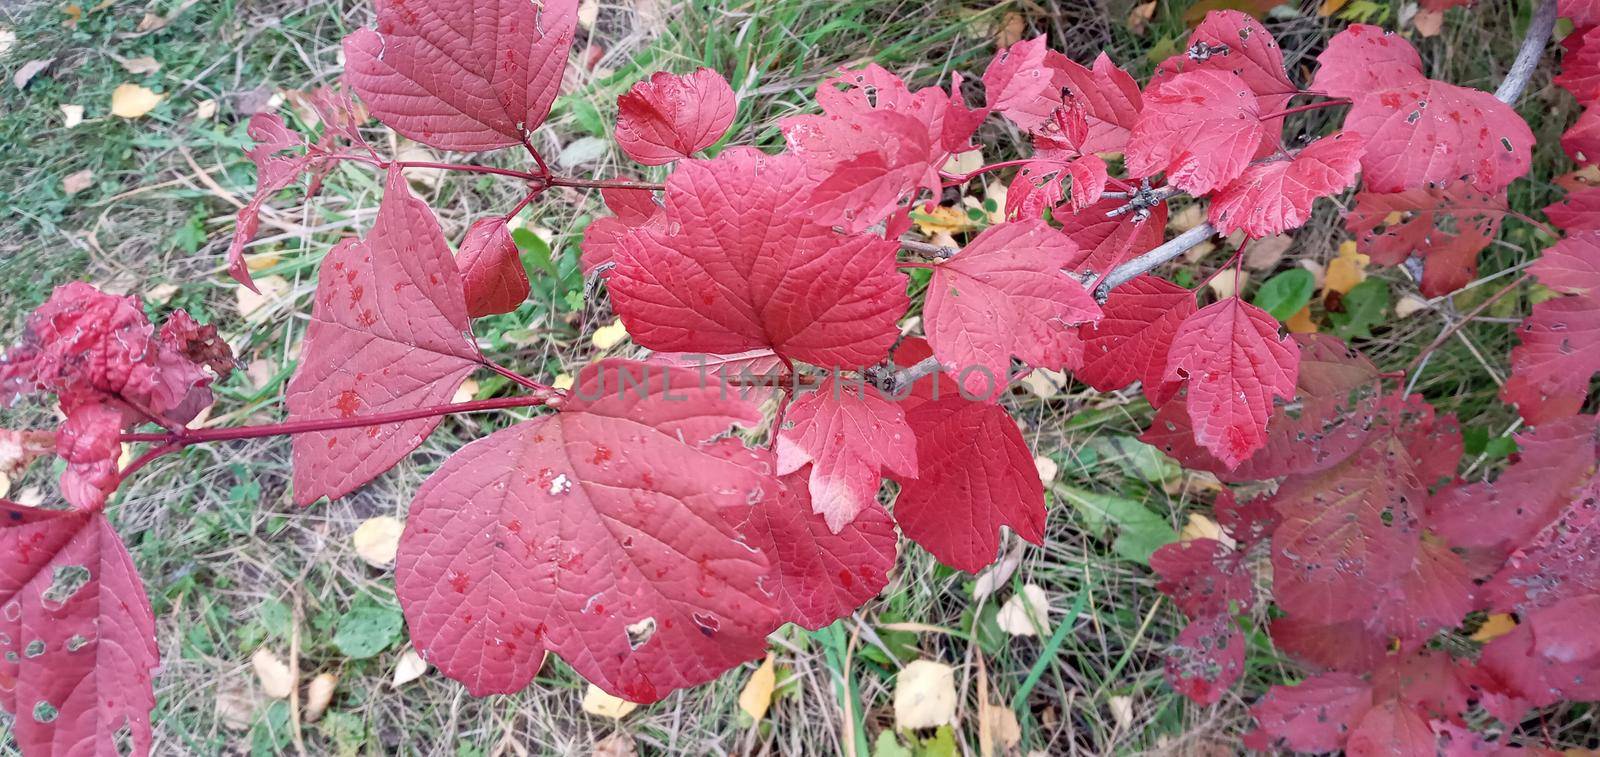 Bright, red viburnum leaves on the branches. They are lit in red or orange.